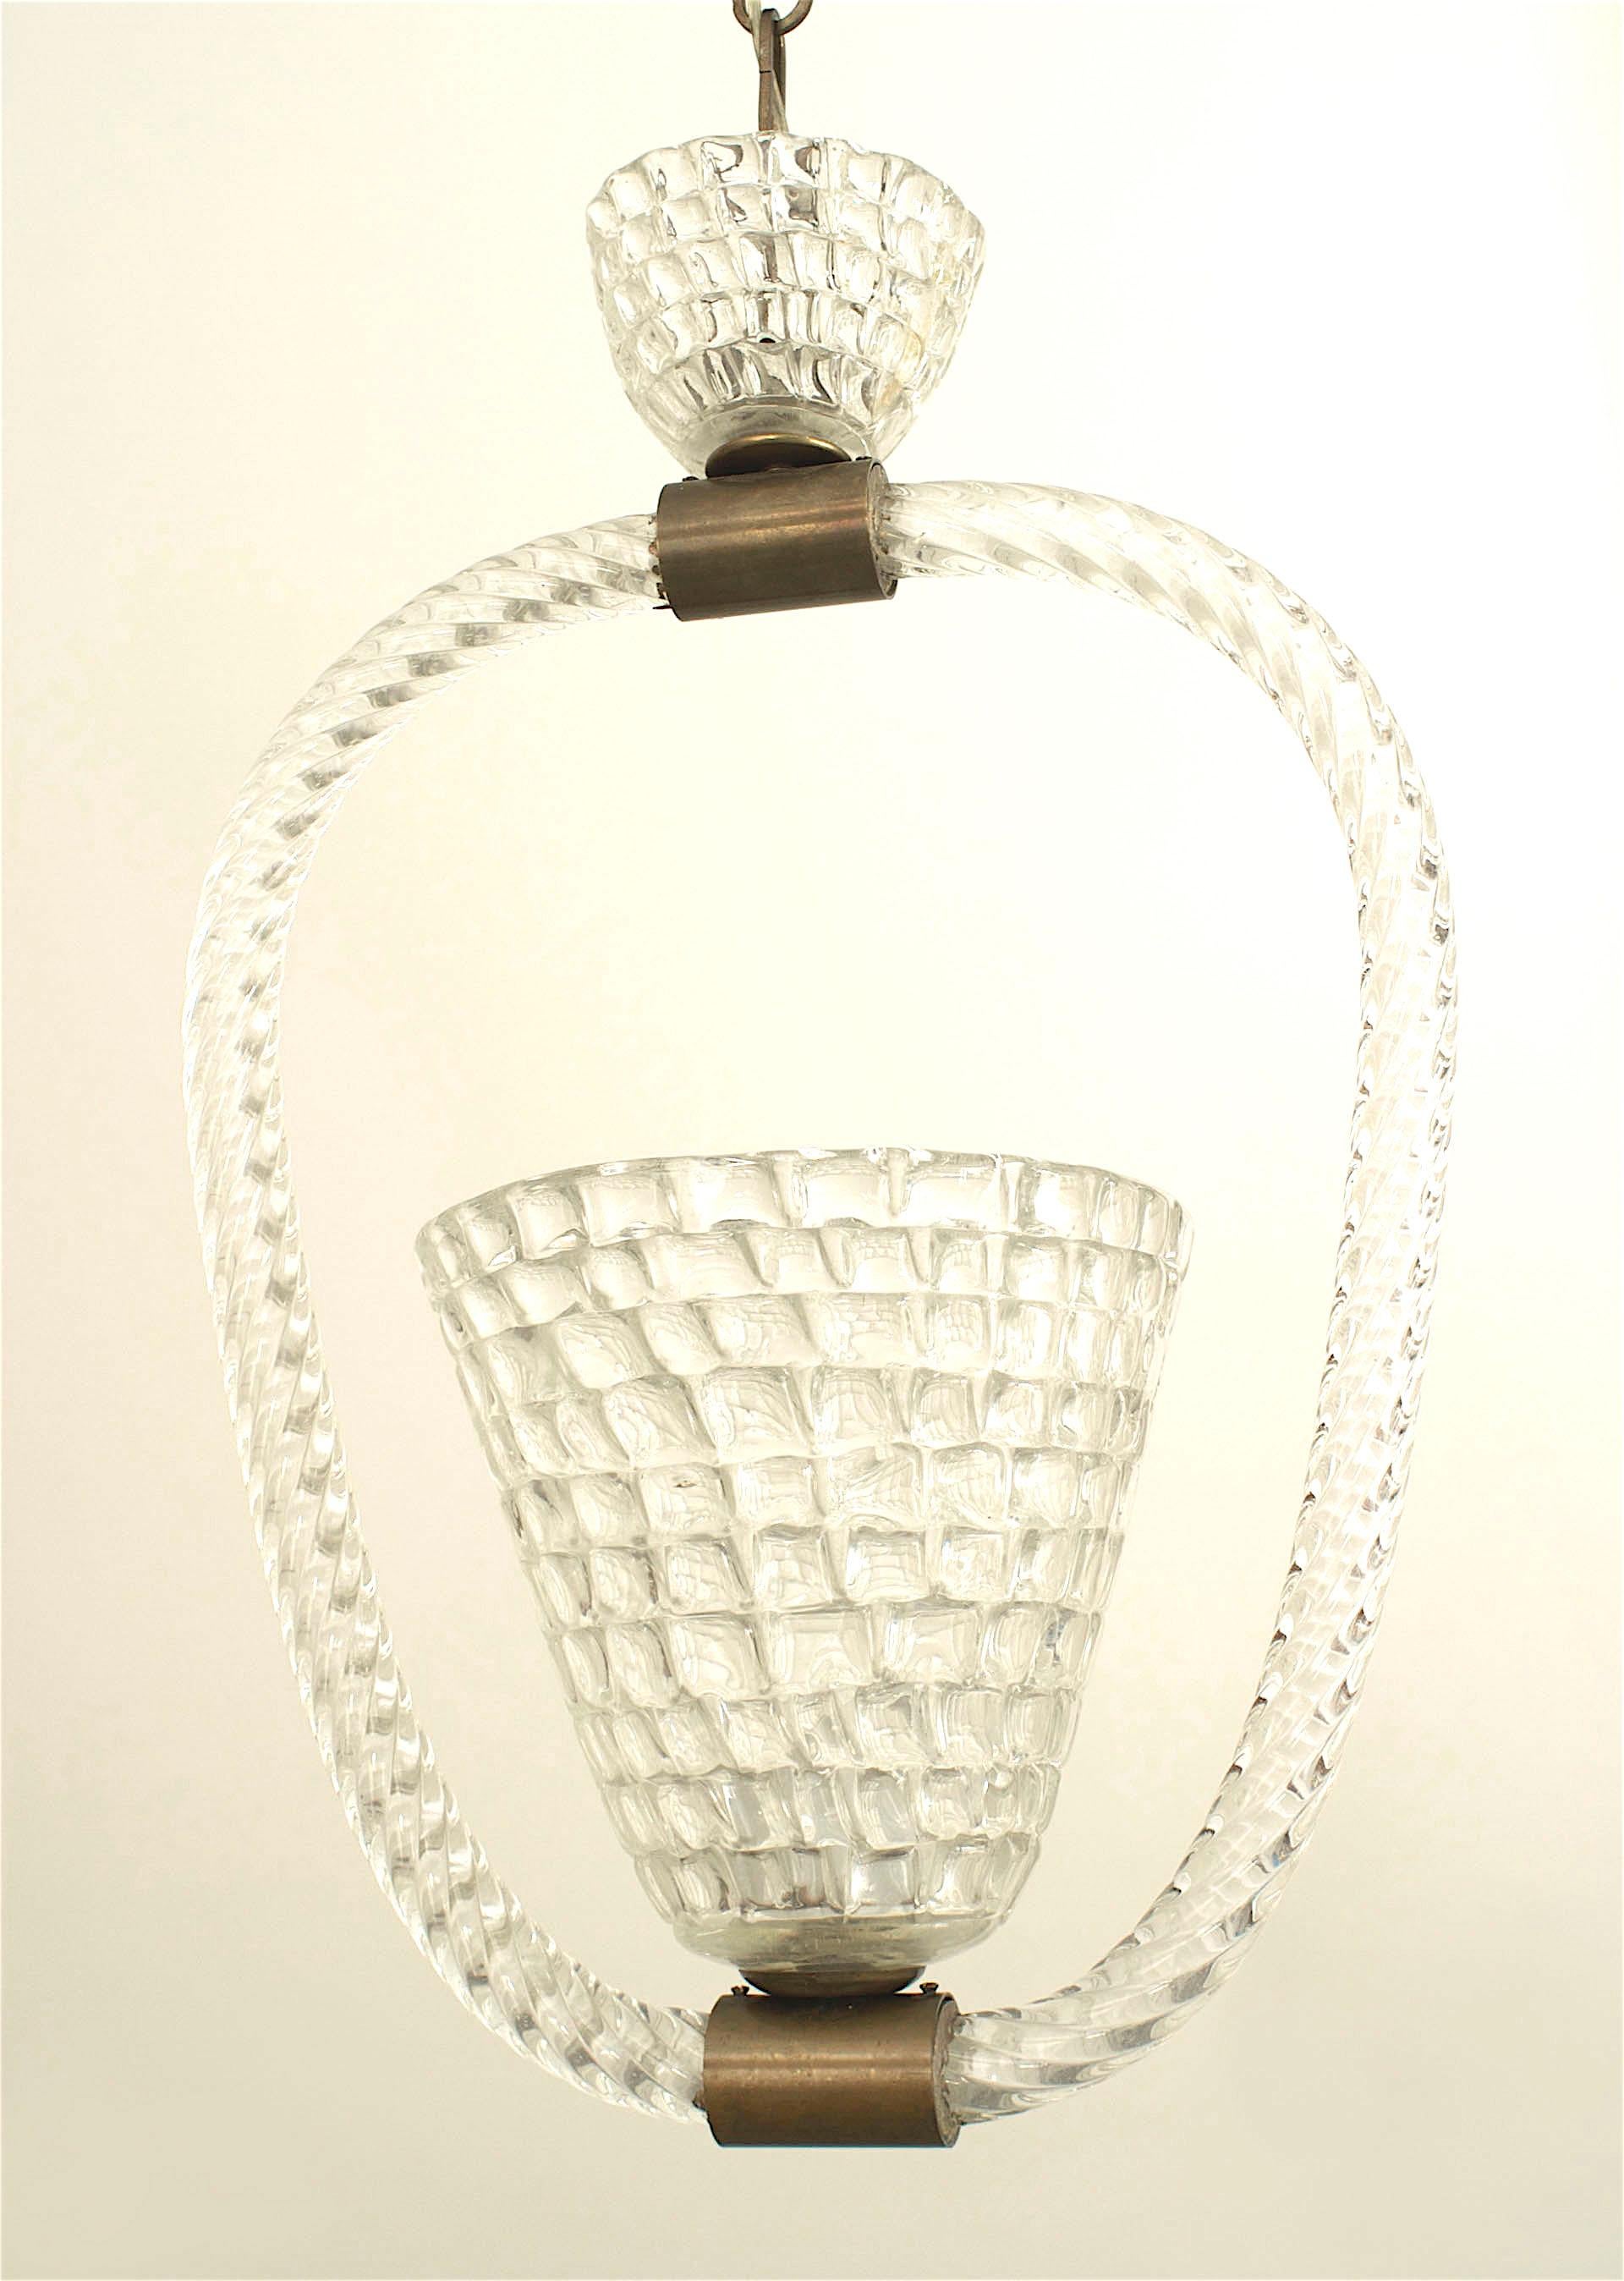 Italian 1940s lantern with a conical shaped centered woven form clear glass shade surrounded by a clear swirl glass ring with metal fittings (BAROVIER ET TOSO).
